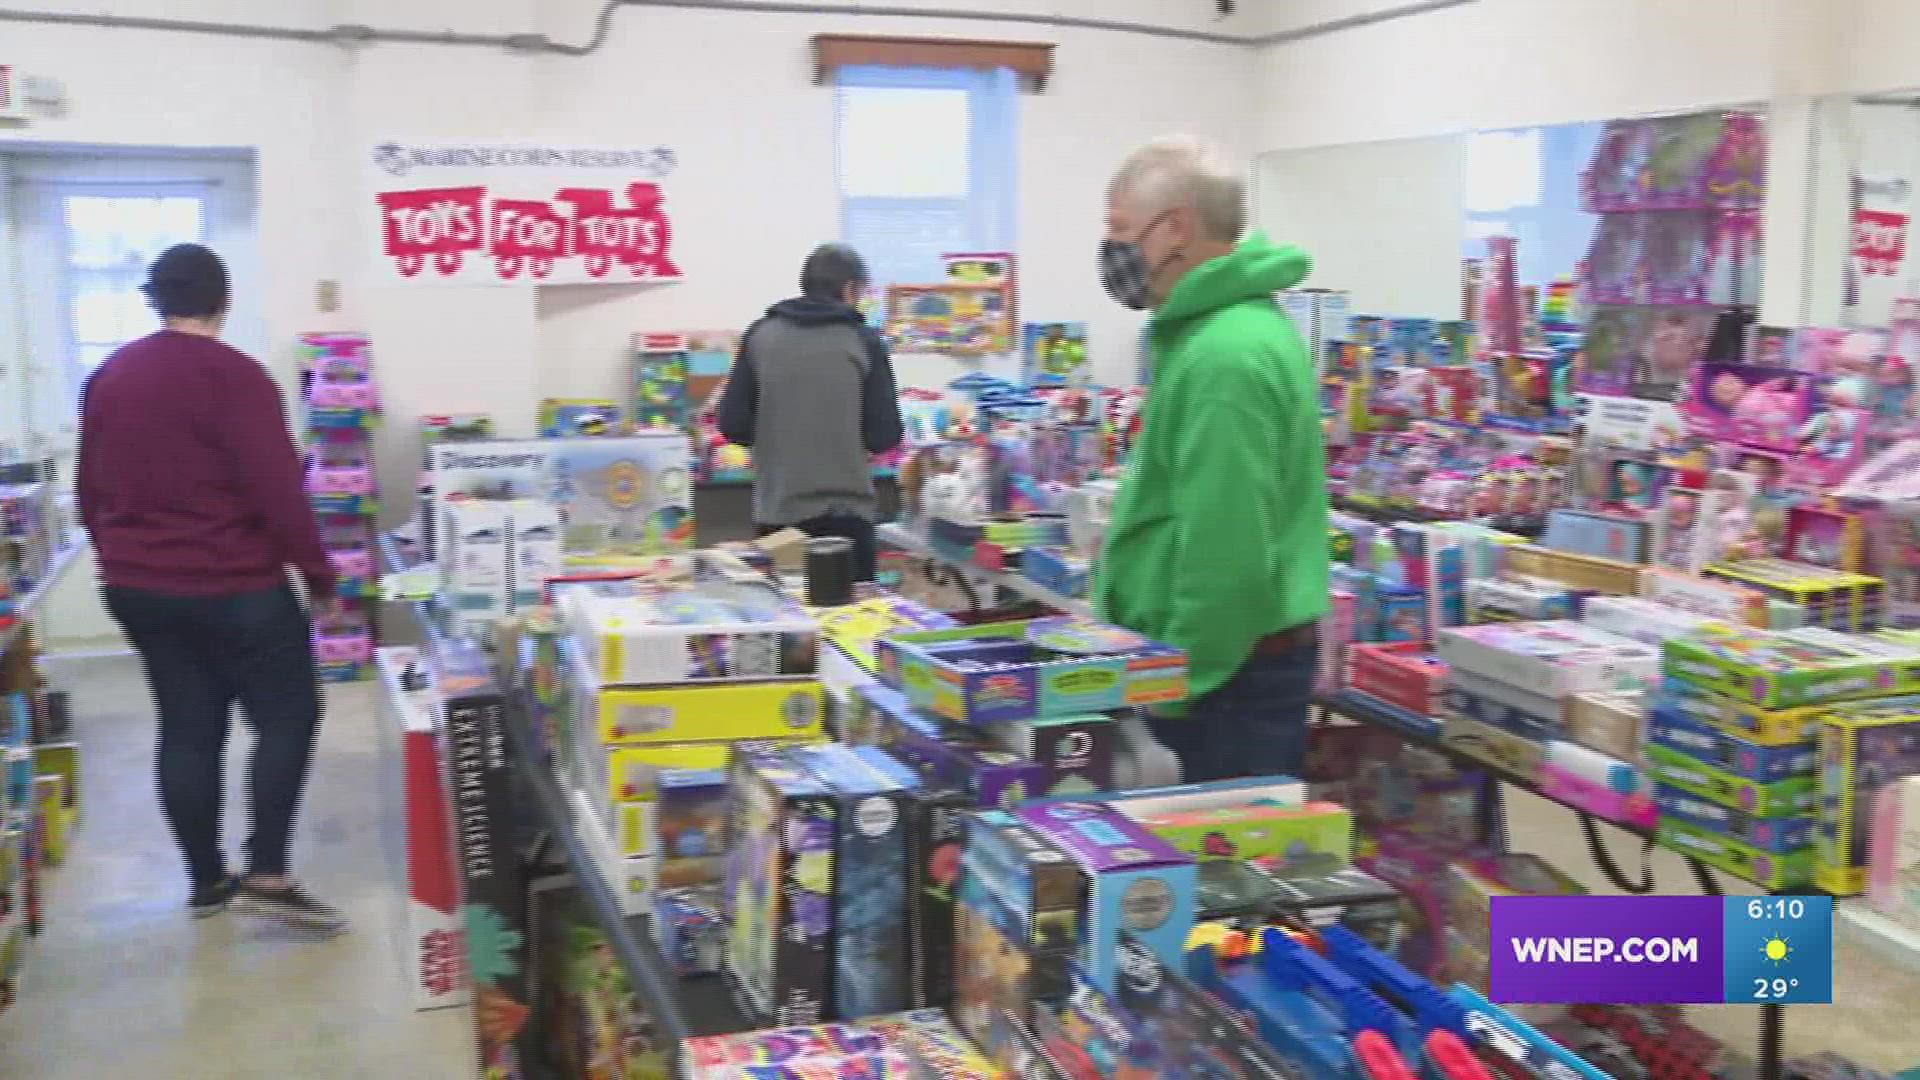 It was the first day of toy distribution at Pleasant Valley Ecumenical Network in Brodheadsville for families in need. Newswatch 16's Emily Kress has the story.